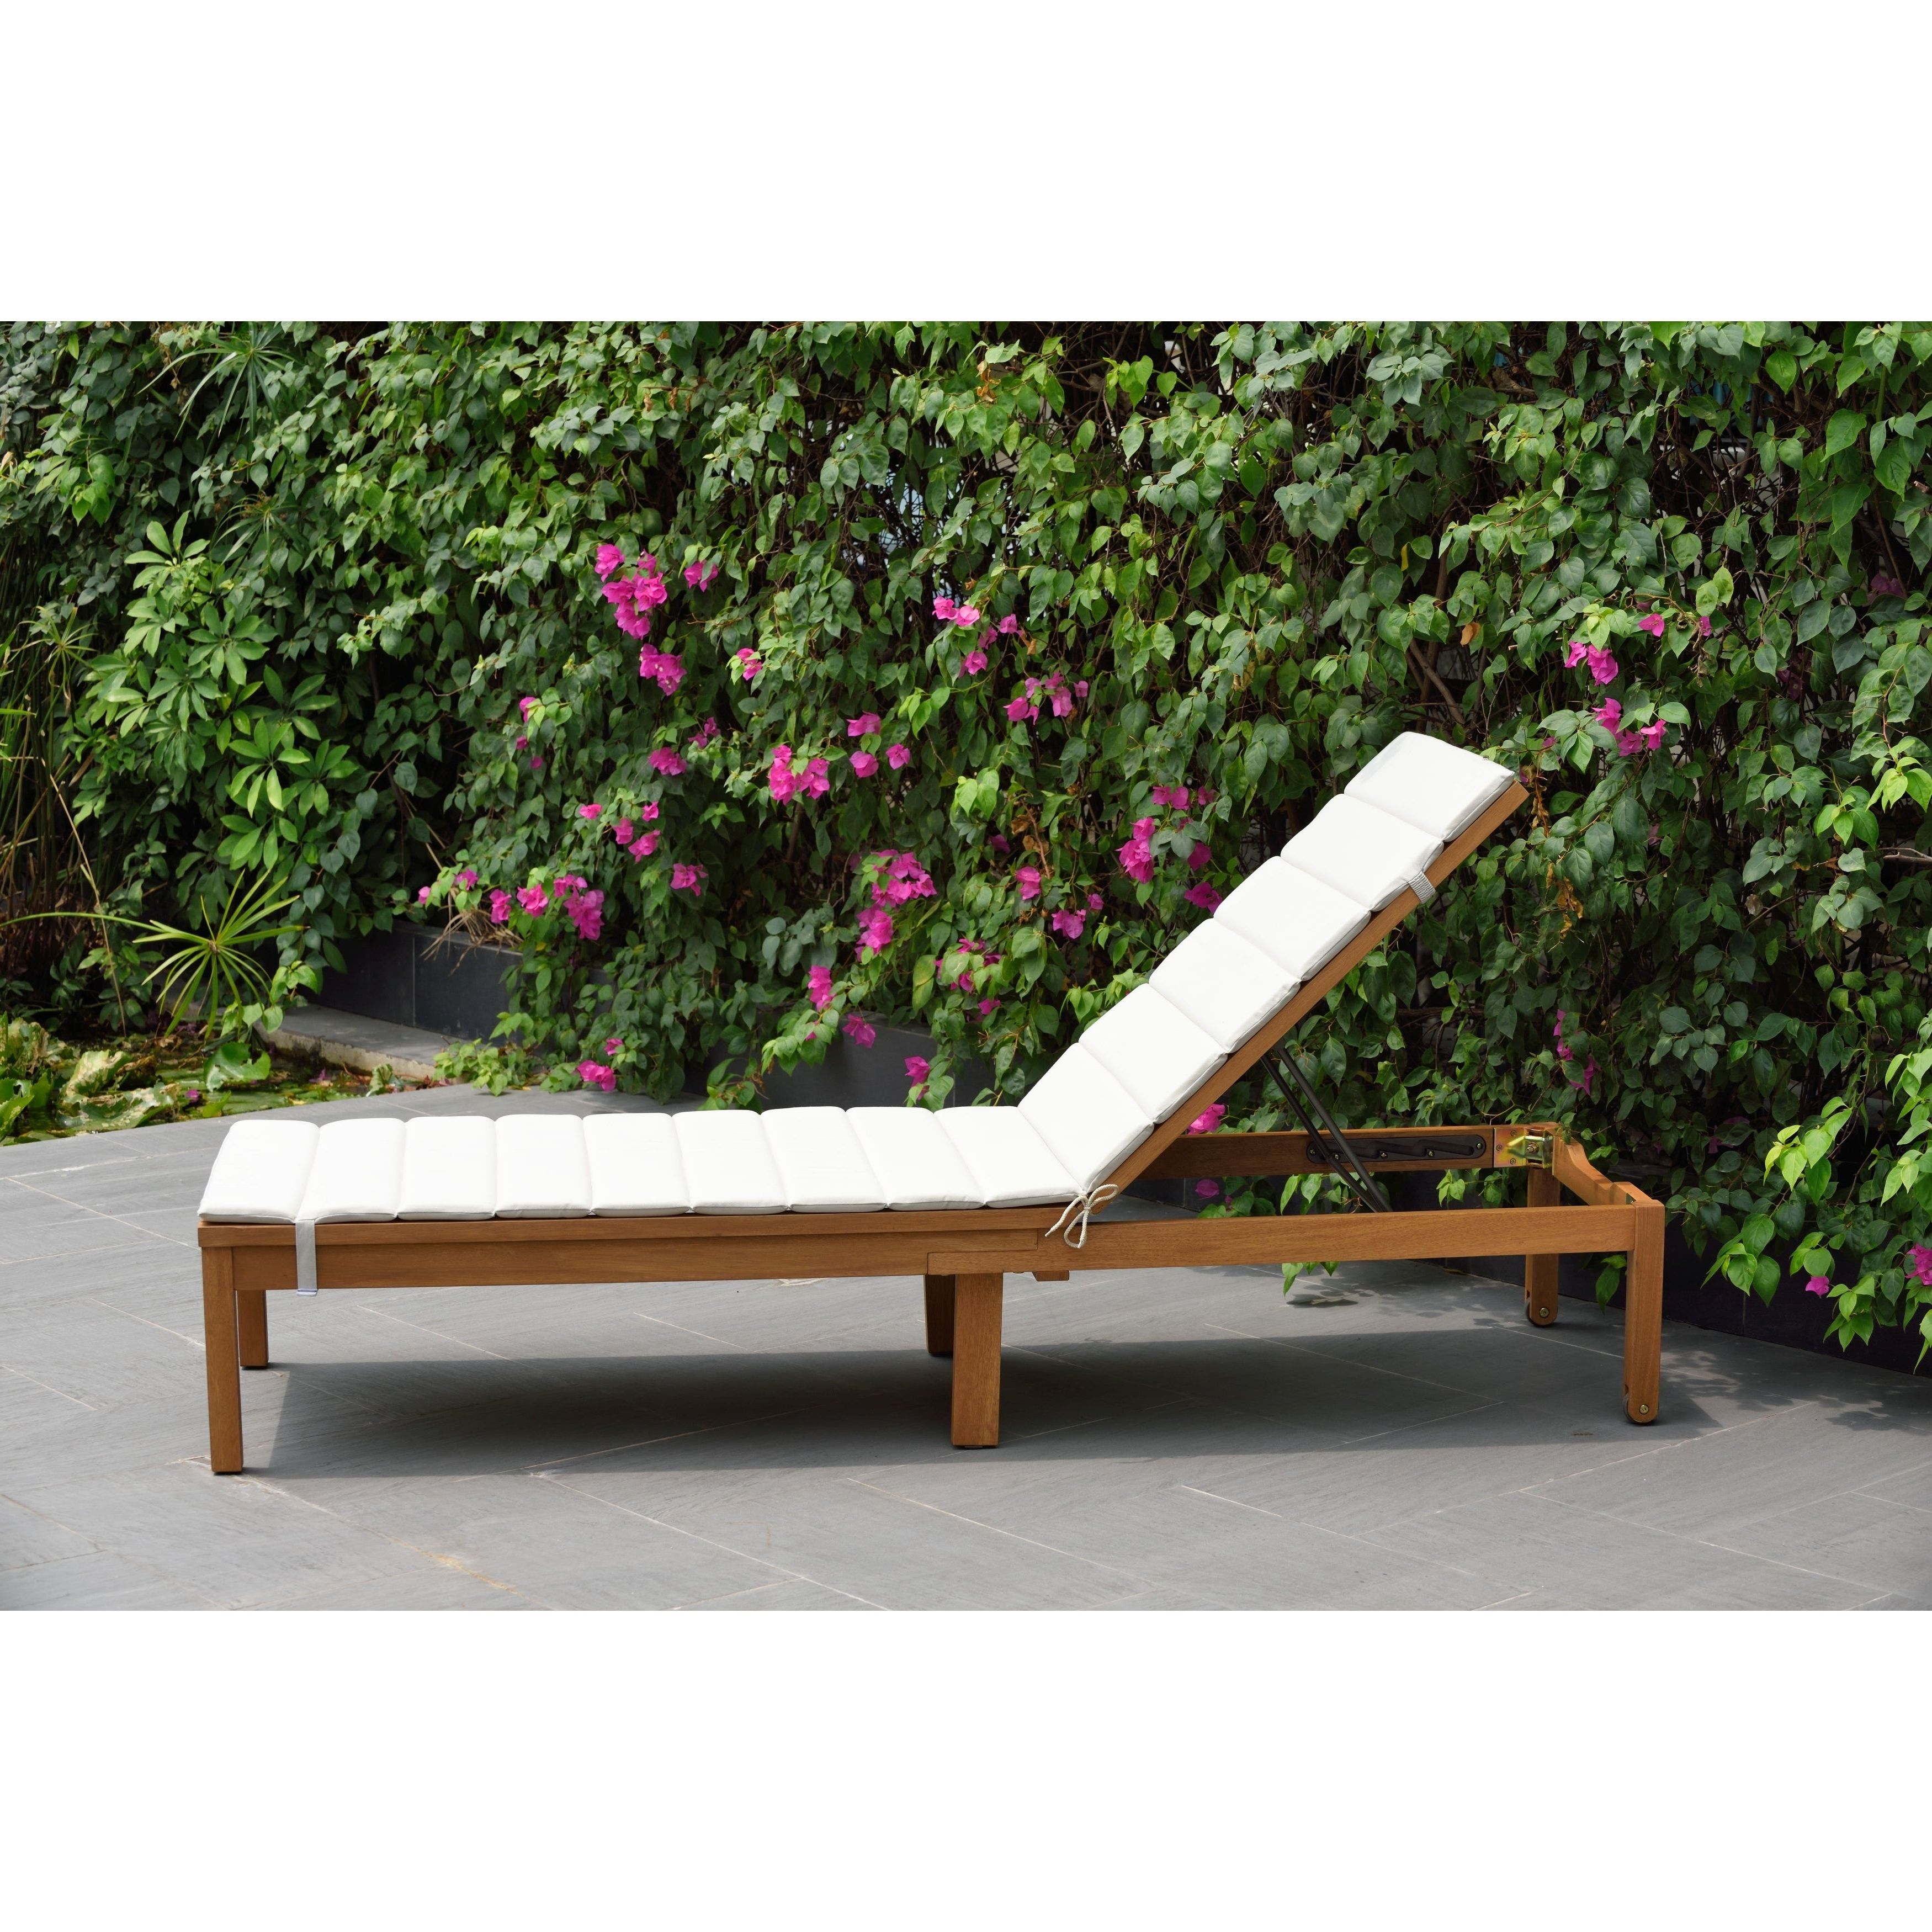 Most Current Eucalyptus Teak Finish Outdoor Chaise Loungers With Cushion With Regard To Amazonia Katia Eucalyptus/teak Finish Outdoor Chaise Lounger With Grey  Cushion (View 1 of 25)